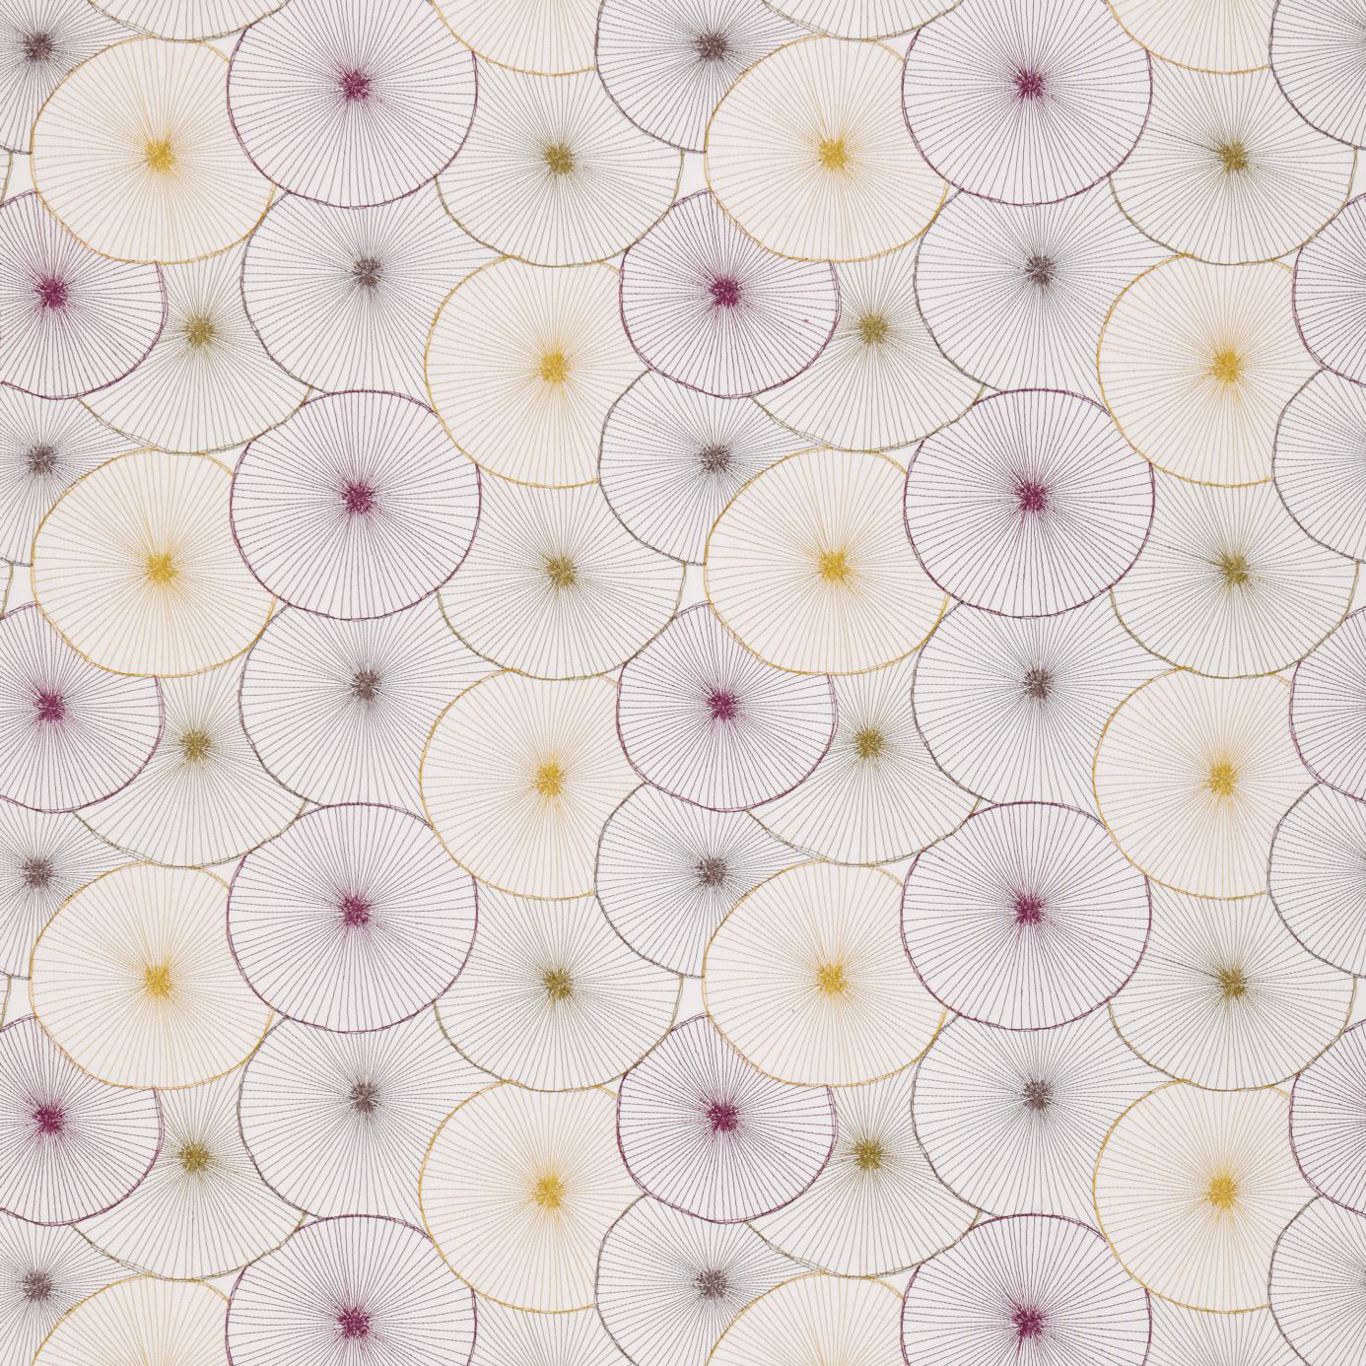 Aster Fabric by Harlequin - HGAT131587 - Chartreuse / Plum / Truffle / Gold